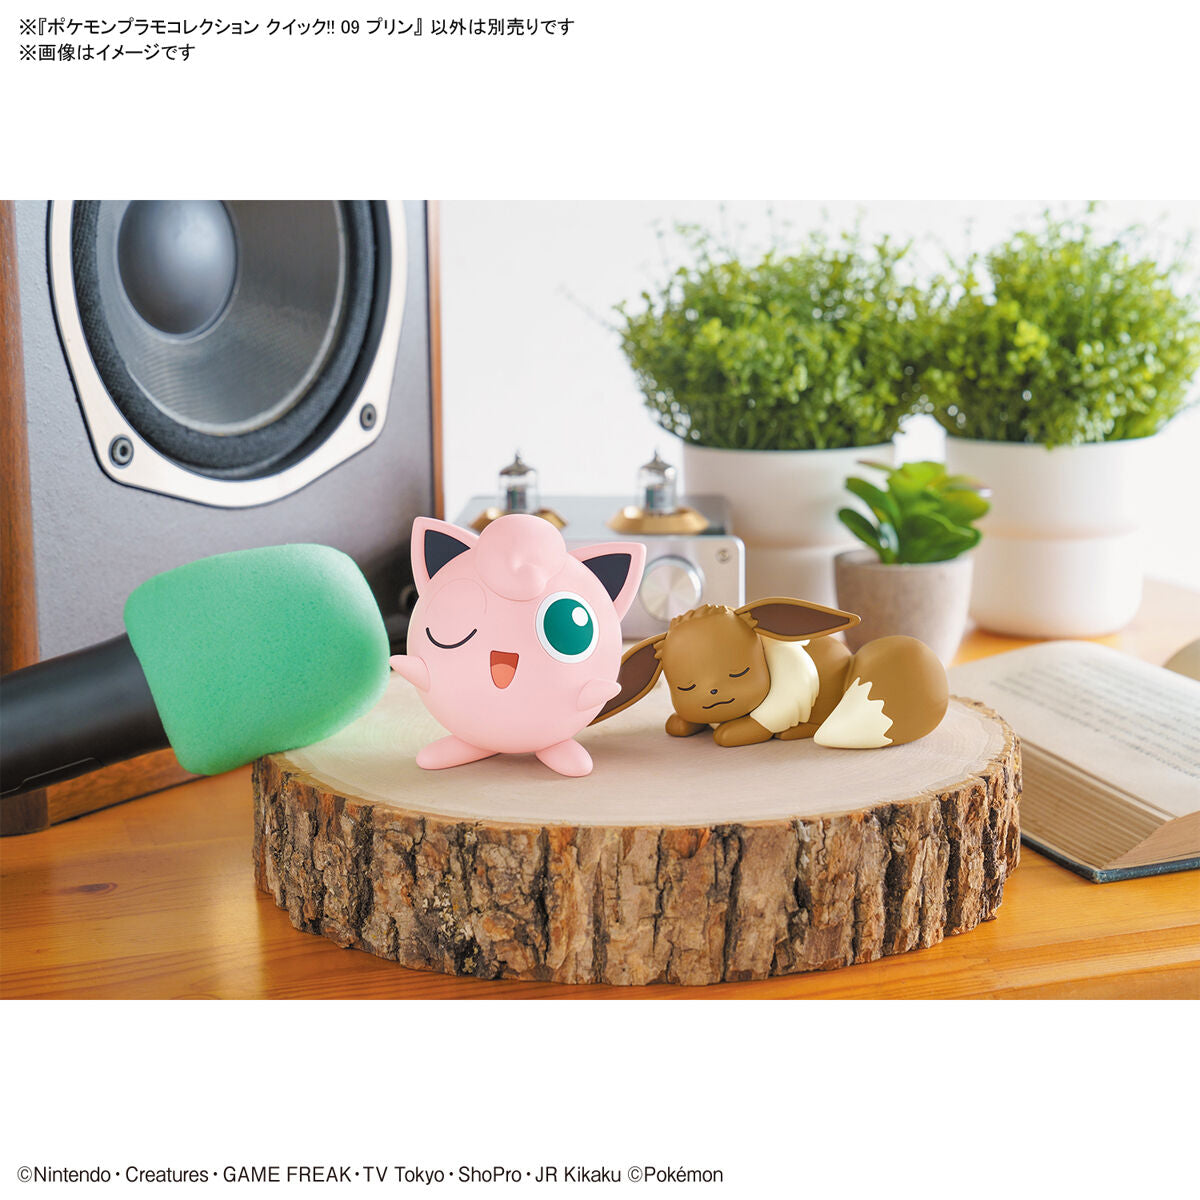 Pokémon - Jigglypuff - Pokémon Model Kit Quick!! Collection No. 09 (Bandai), Easy assembly, colorful finish, 75mm tall, Nippon Figures